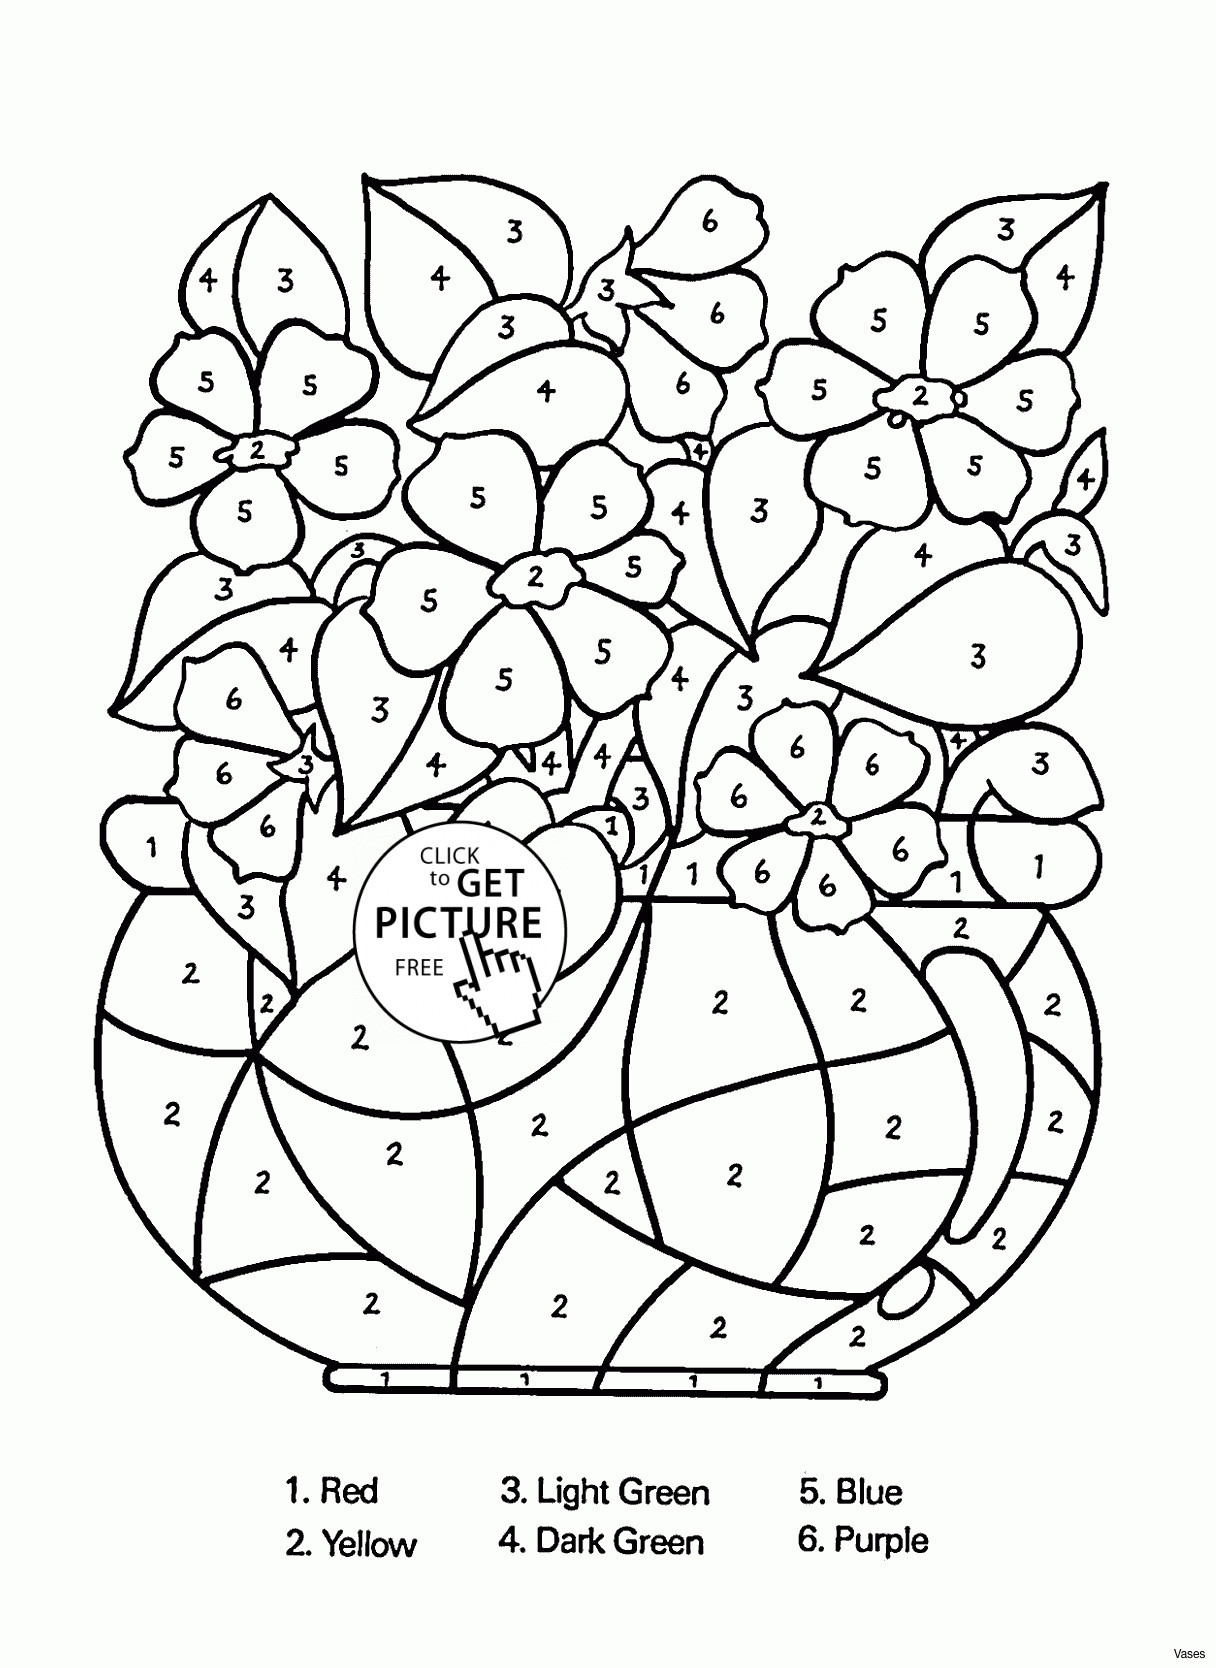 13 attractive White Floor Vase with Flowers 2023 free download white floor vase with flowers of dark green pillows new cool vases flower vase coloring page pages for dark green pillows new cool vases flower vase coloring page pages flowers in a top i